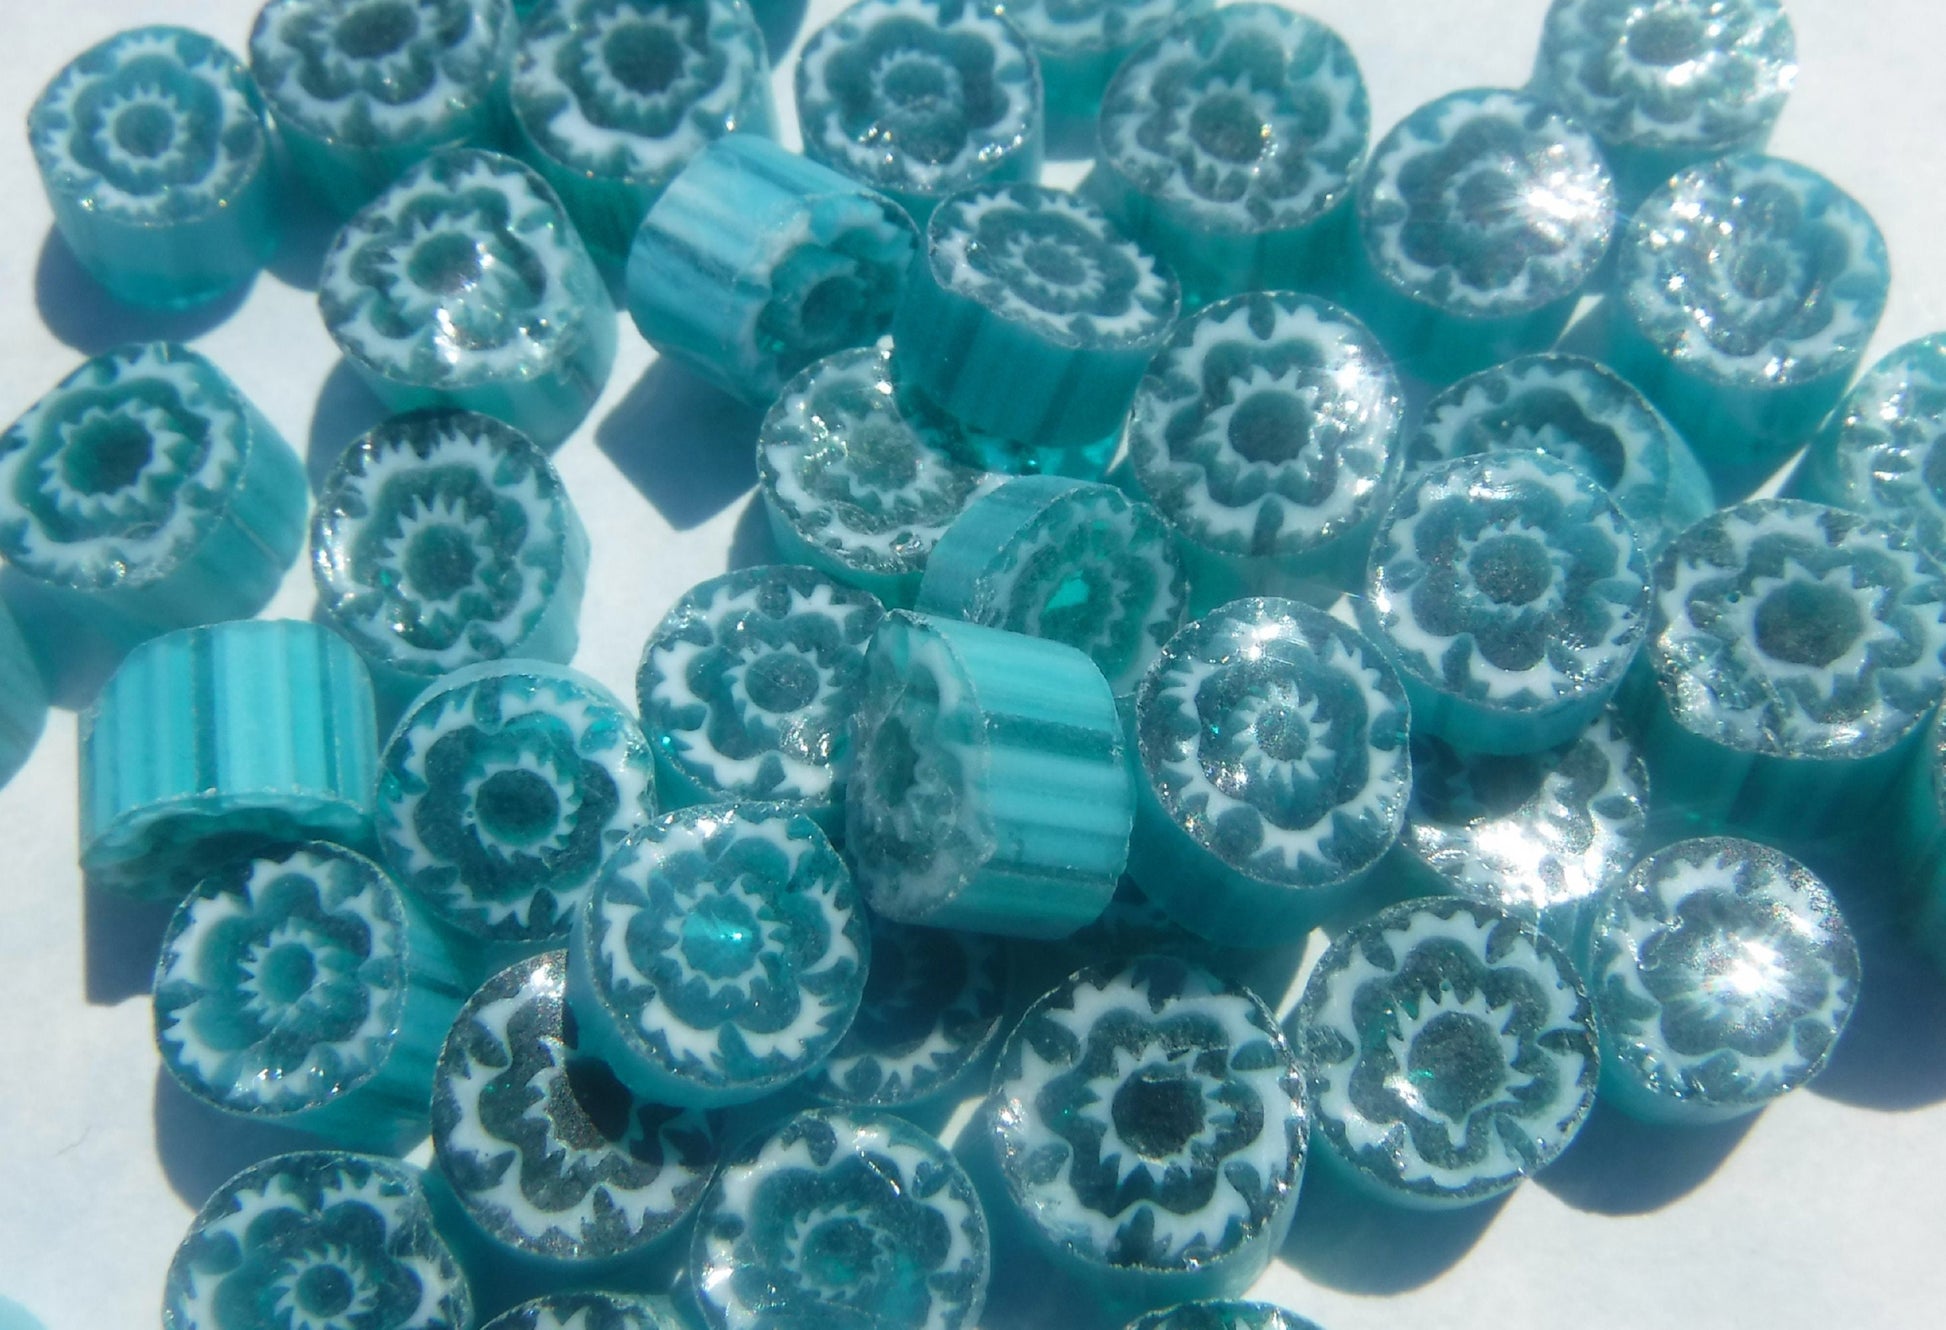 White Flowers in Teal Millefiori - 25 grams - Unique Mosaic Glass Tiles - Floral Pattern